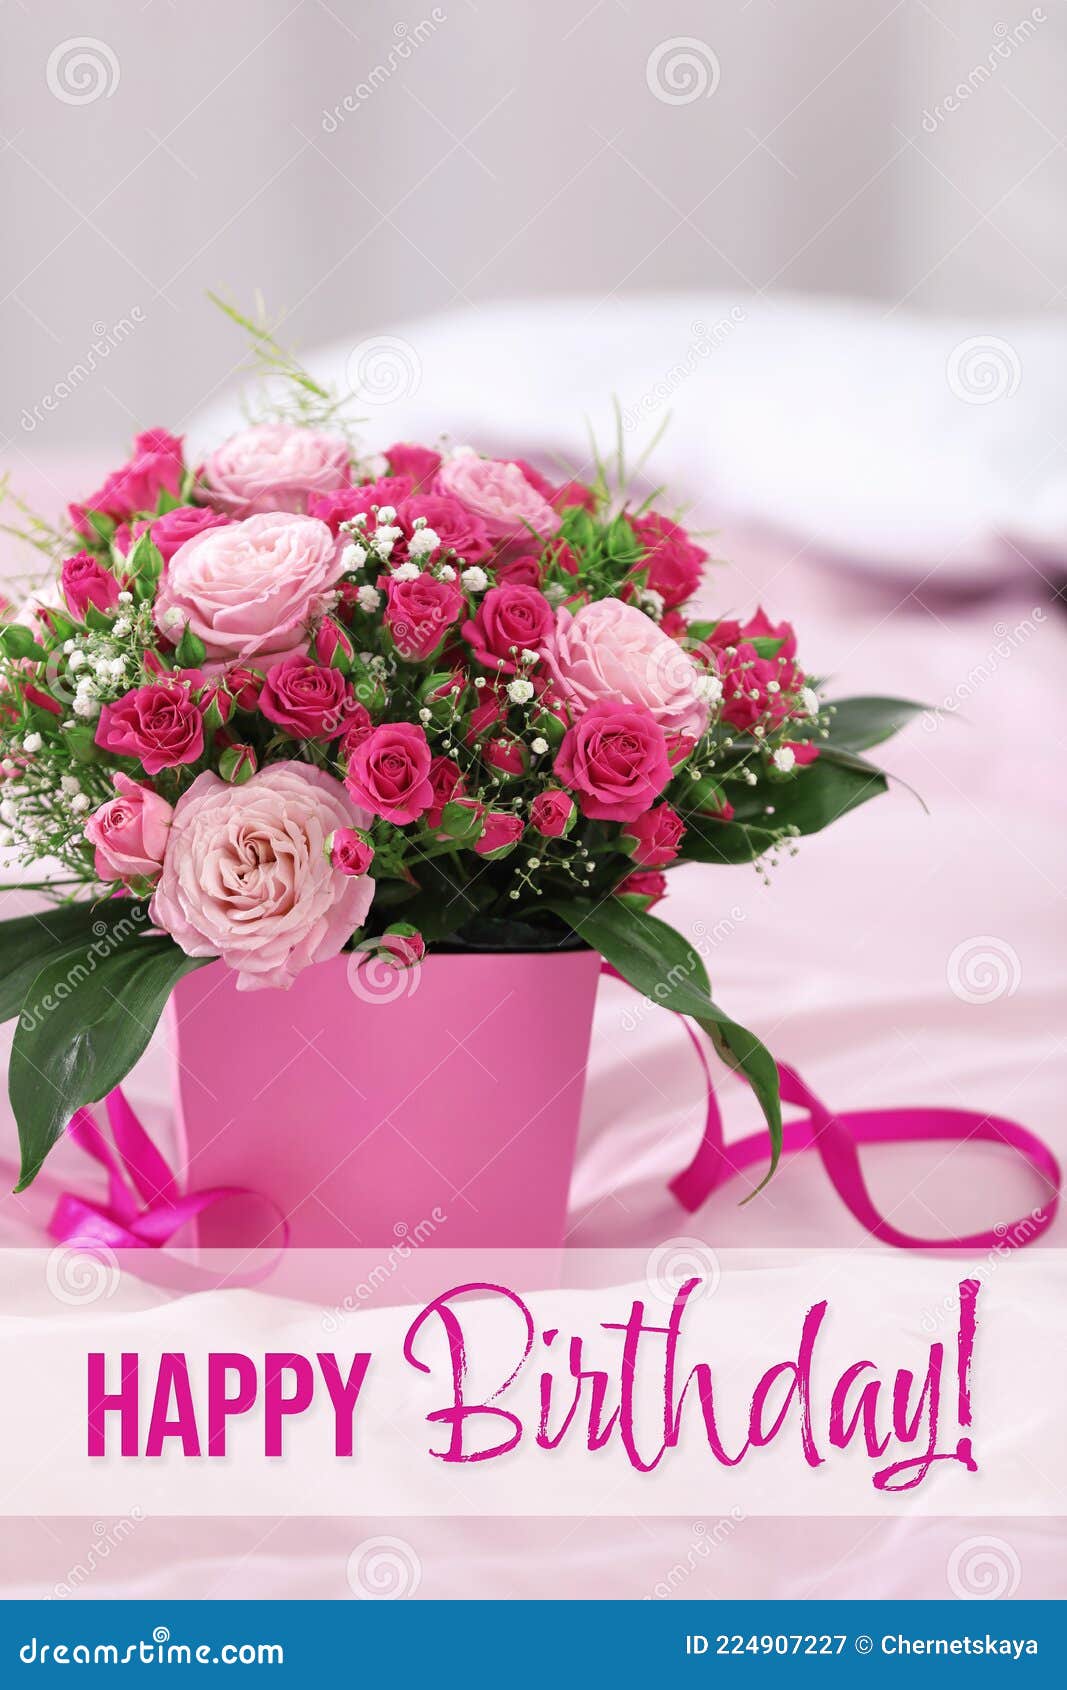 Birthday Flowers & Gifts added - Birthday Flowers & Gifts